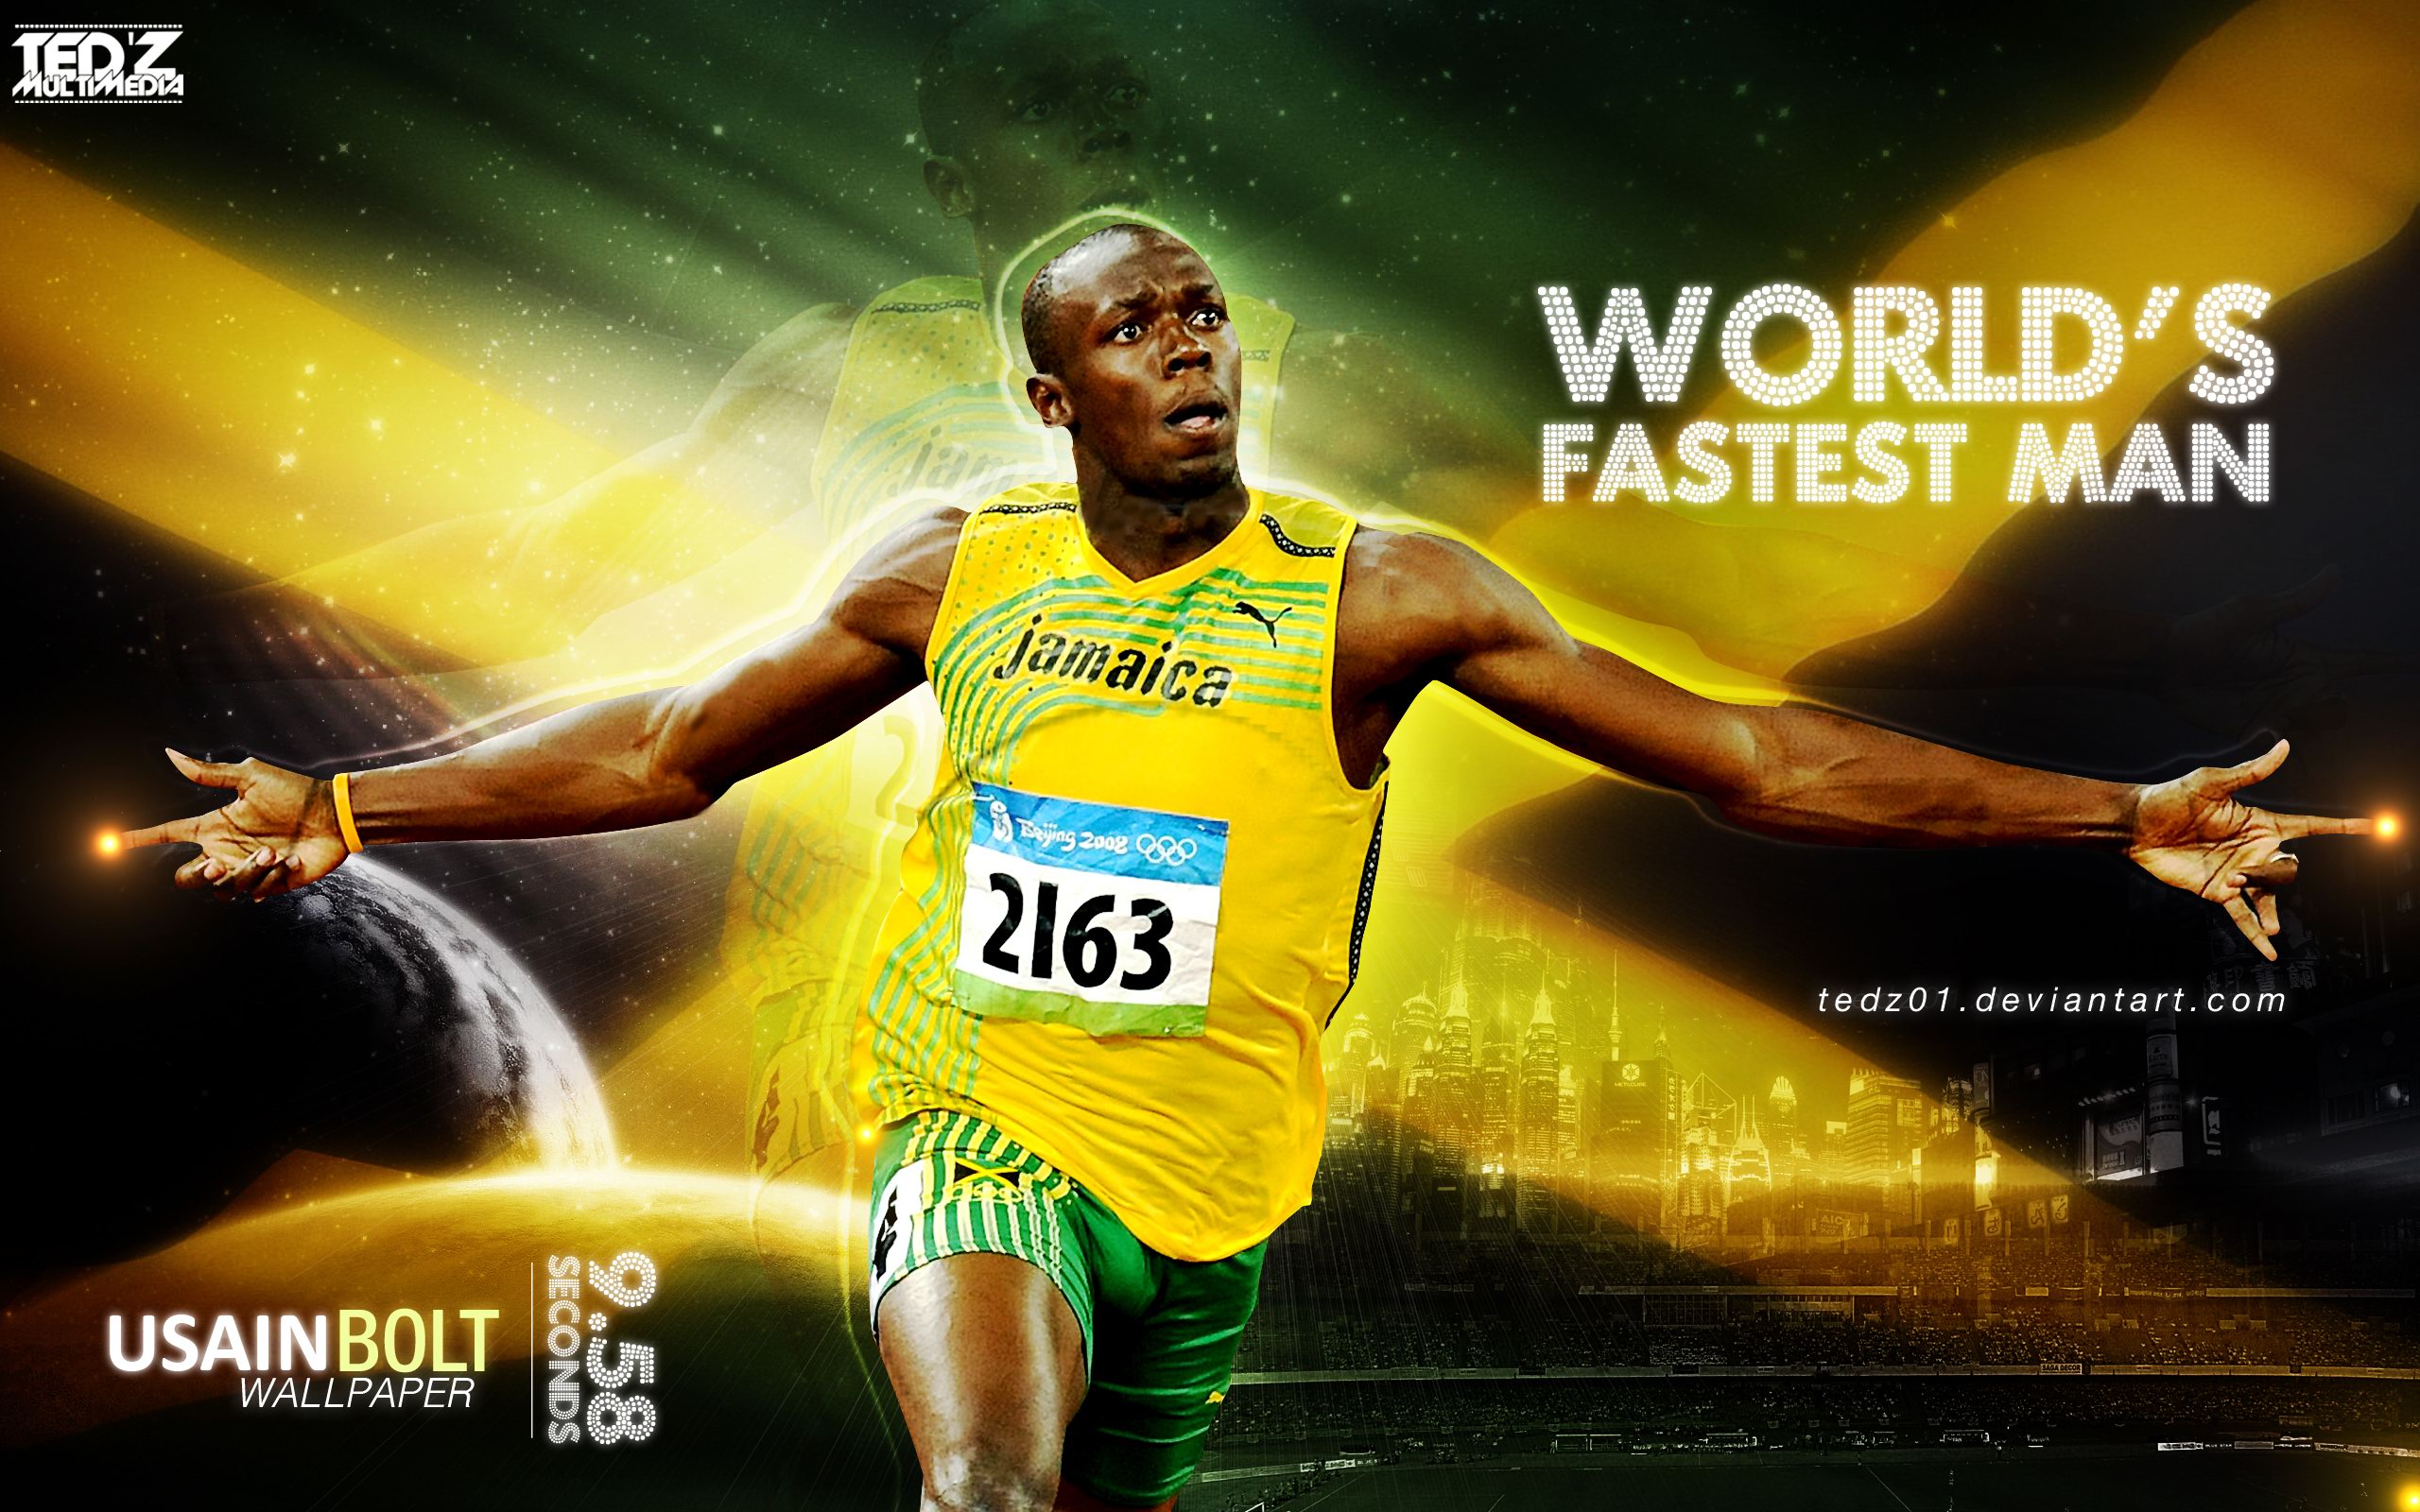 ACE876 NEWS » Usain Bolt to attempt breaking his own world records in Rio 2016!